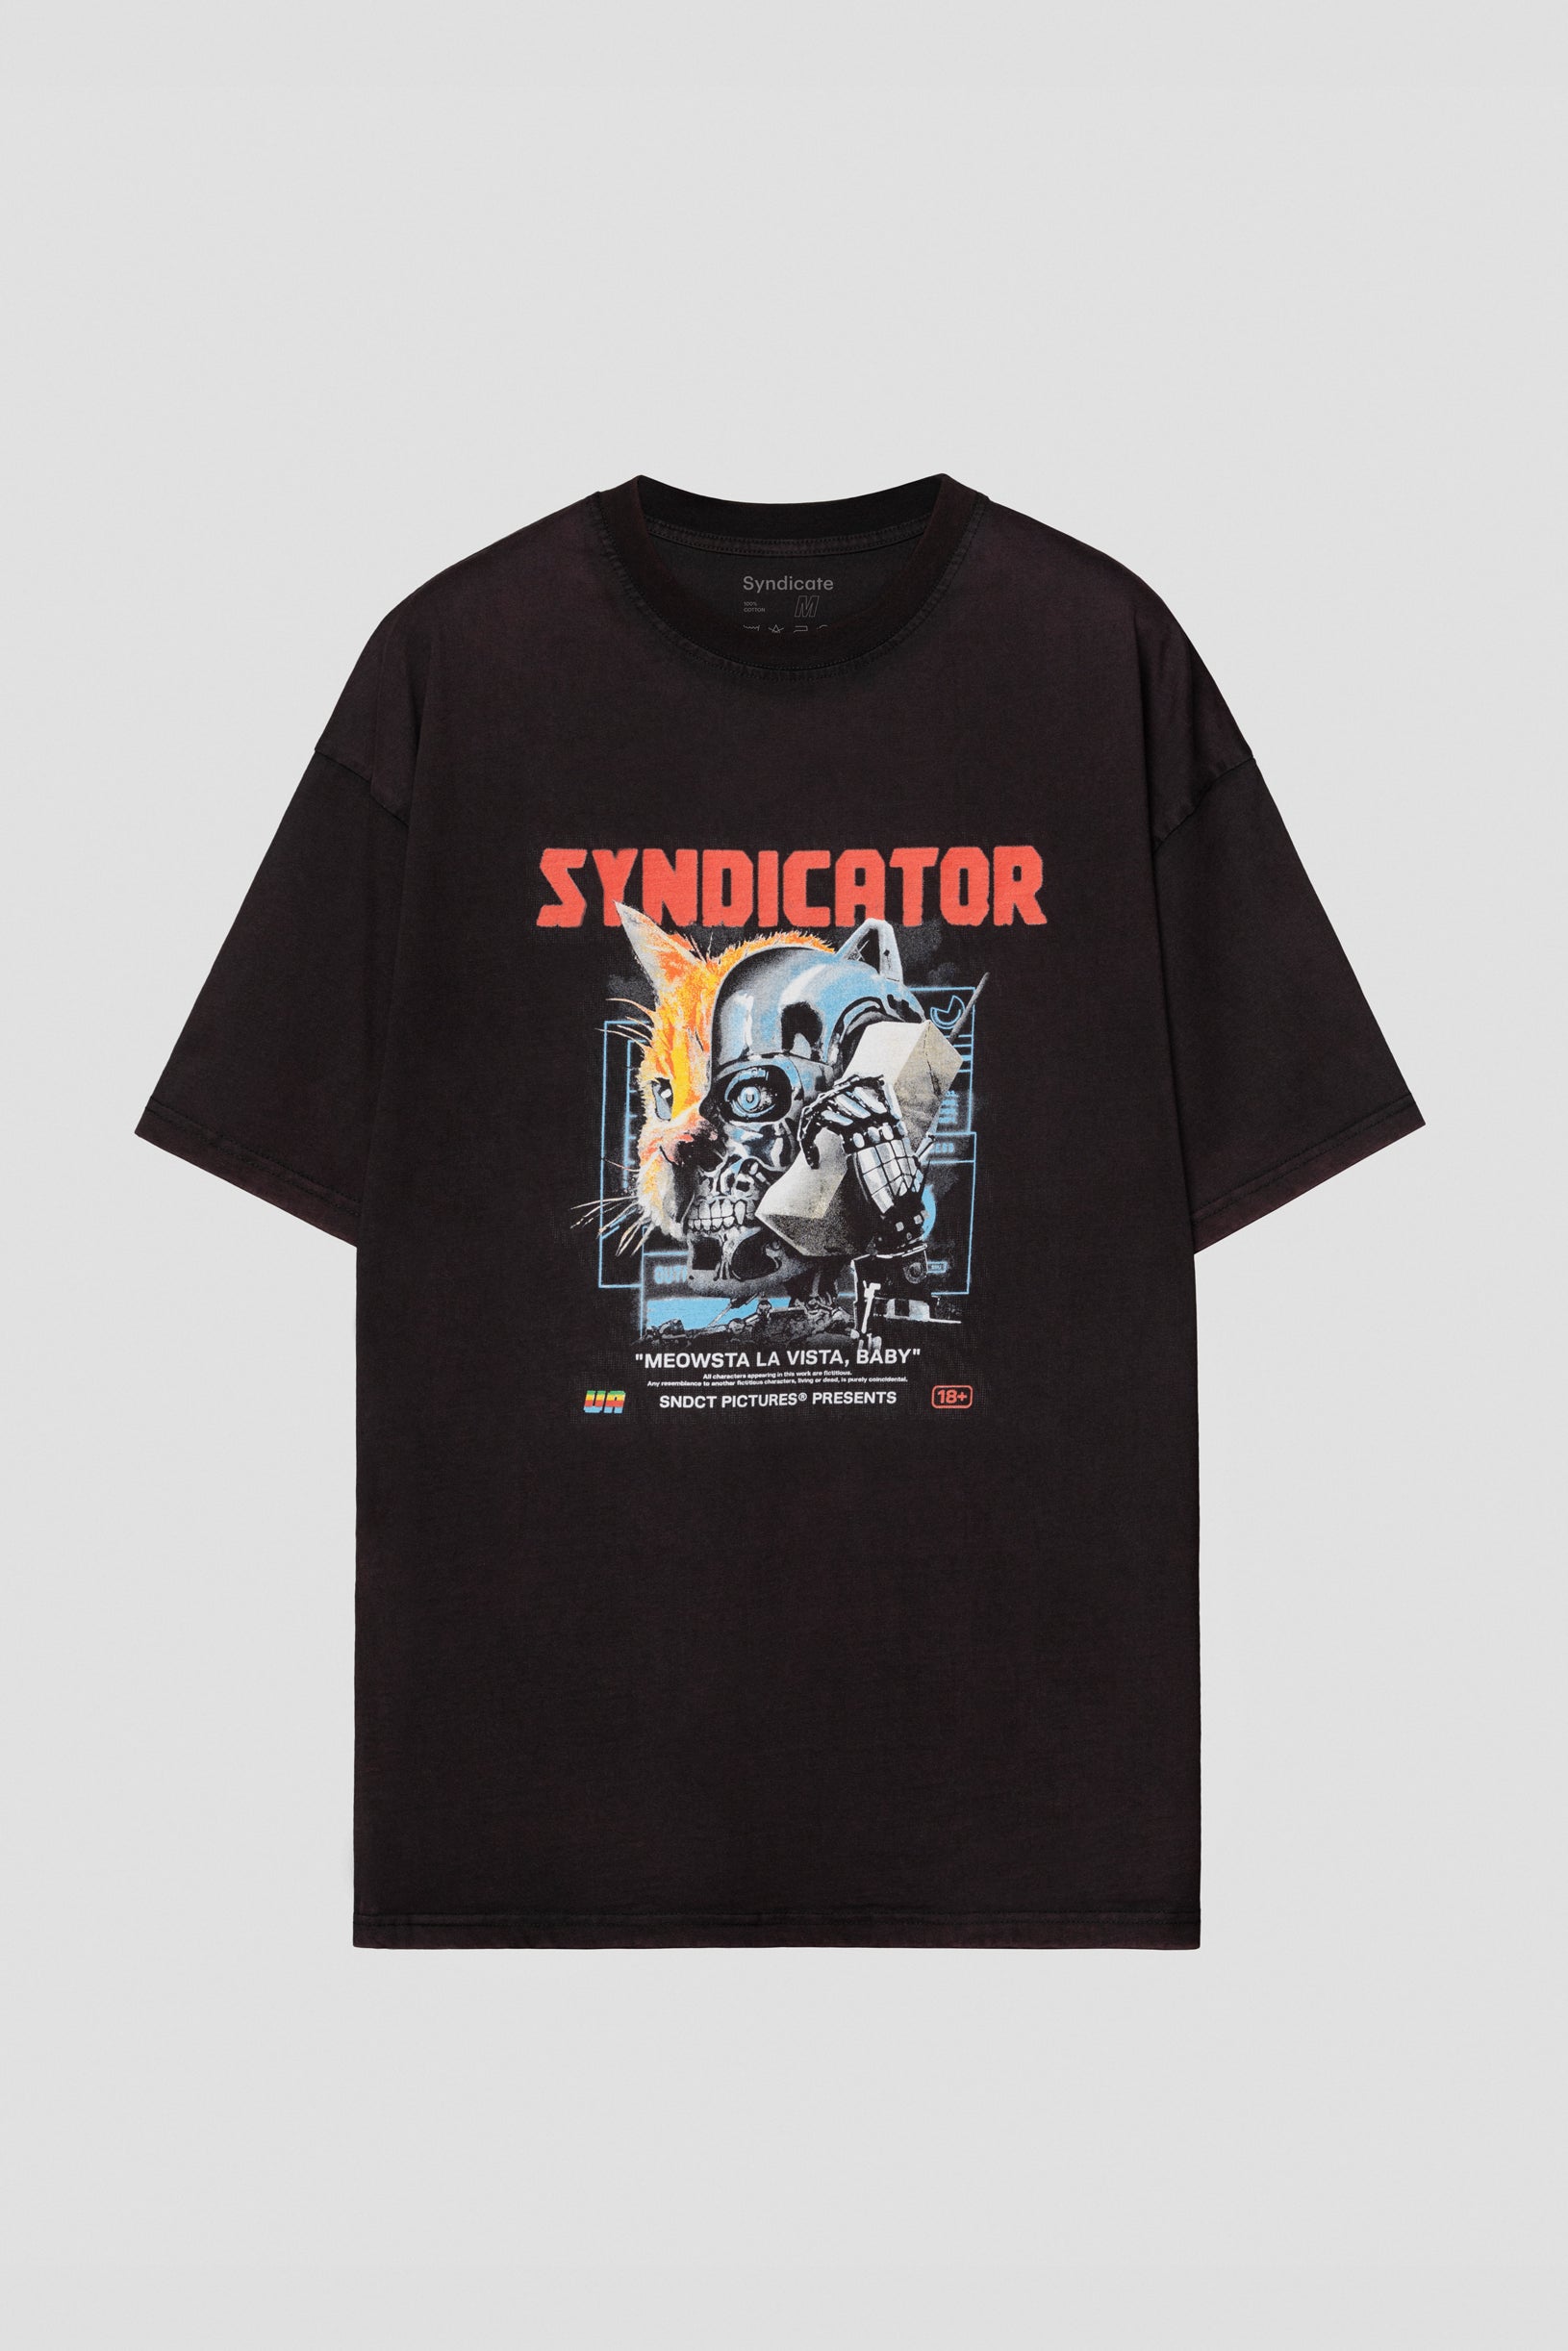 Syndicator oversize worn out t-shirt